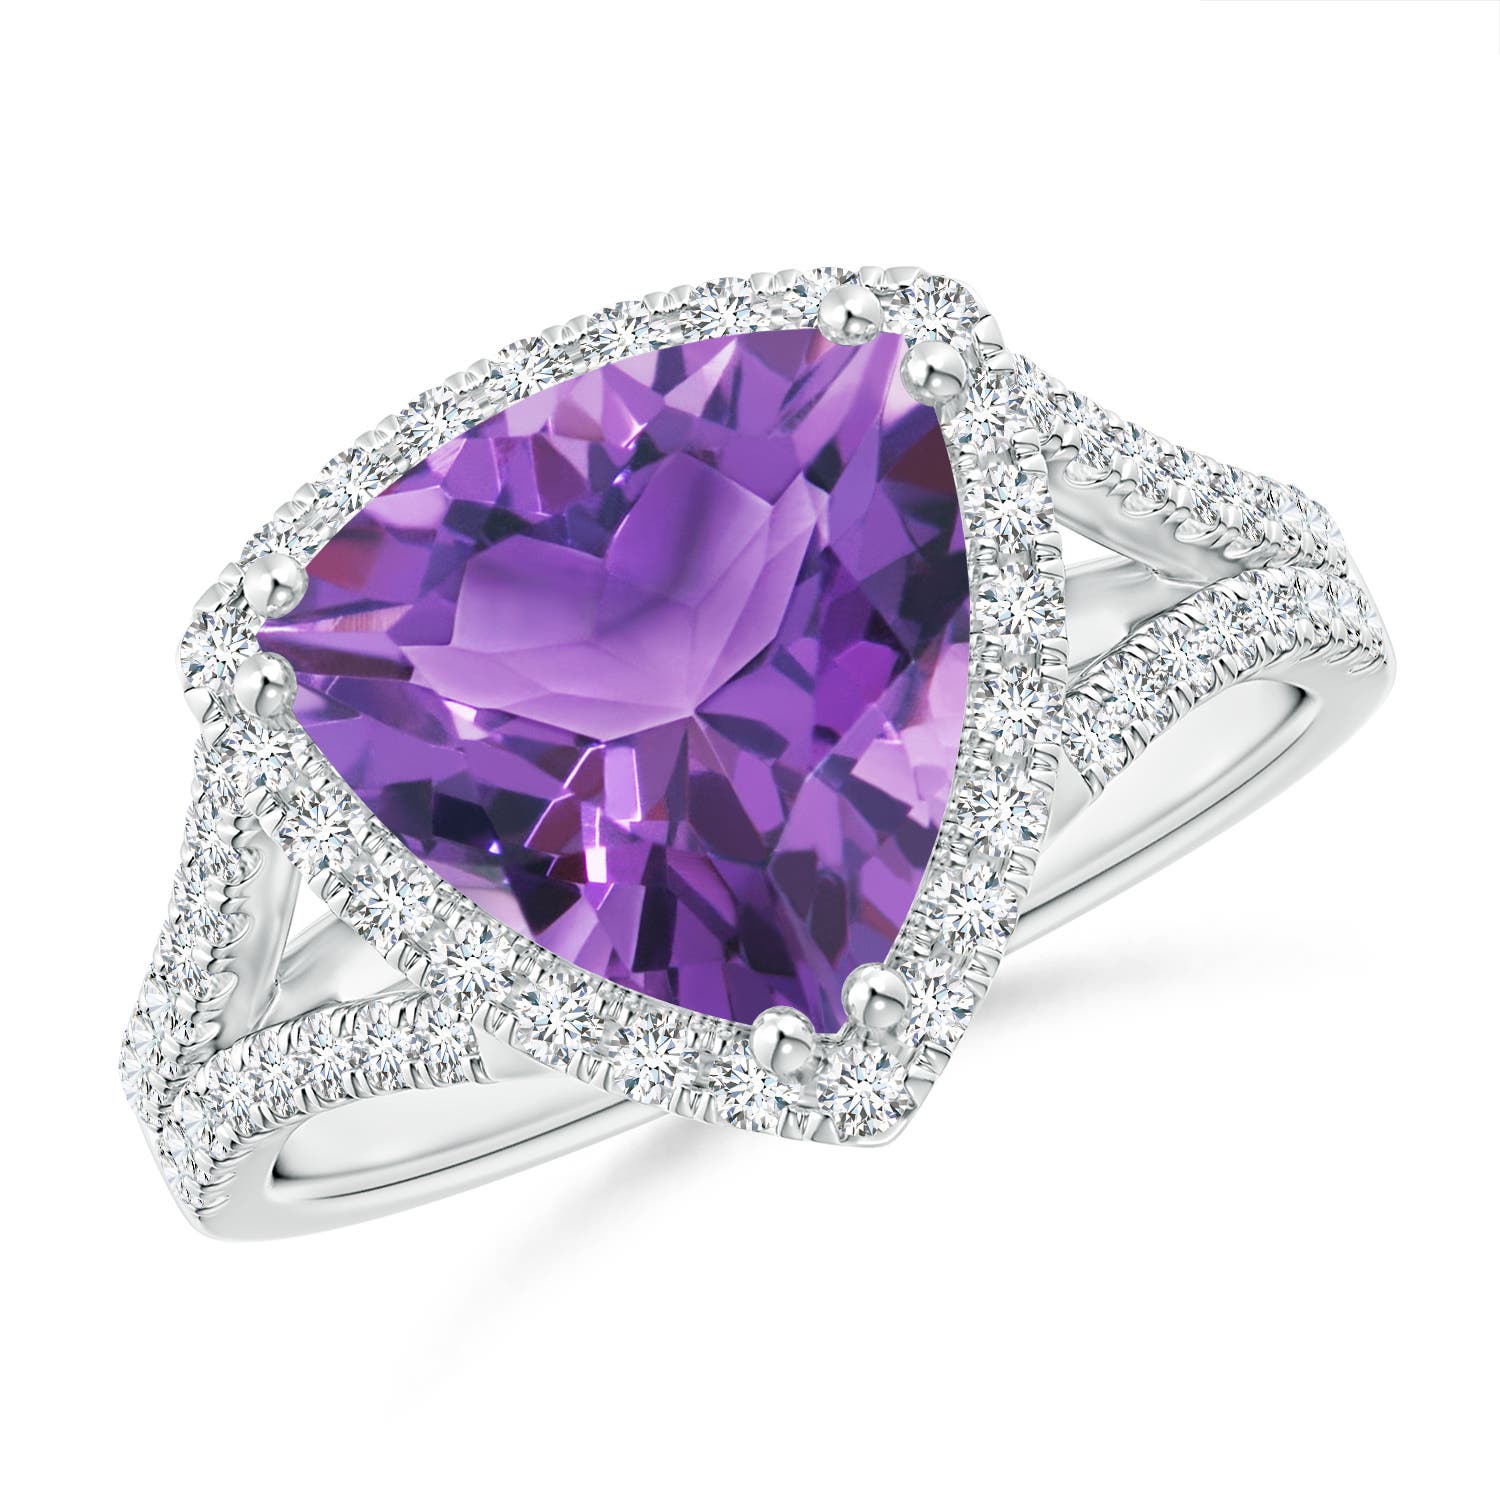 AA - Amethyst / 3.16 CT / 14 KT White Gold